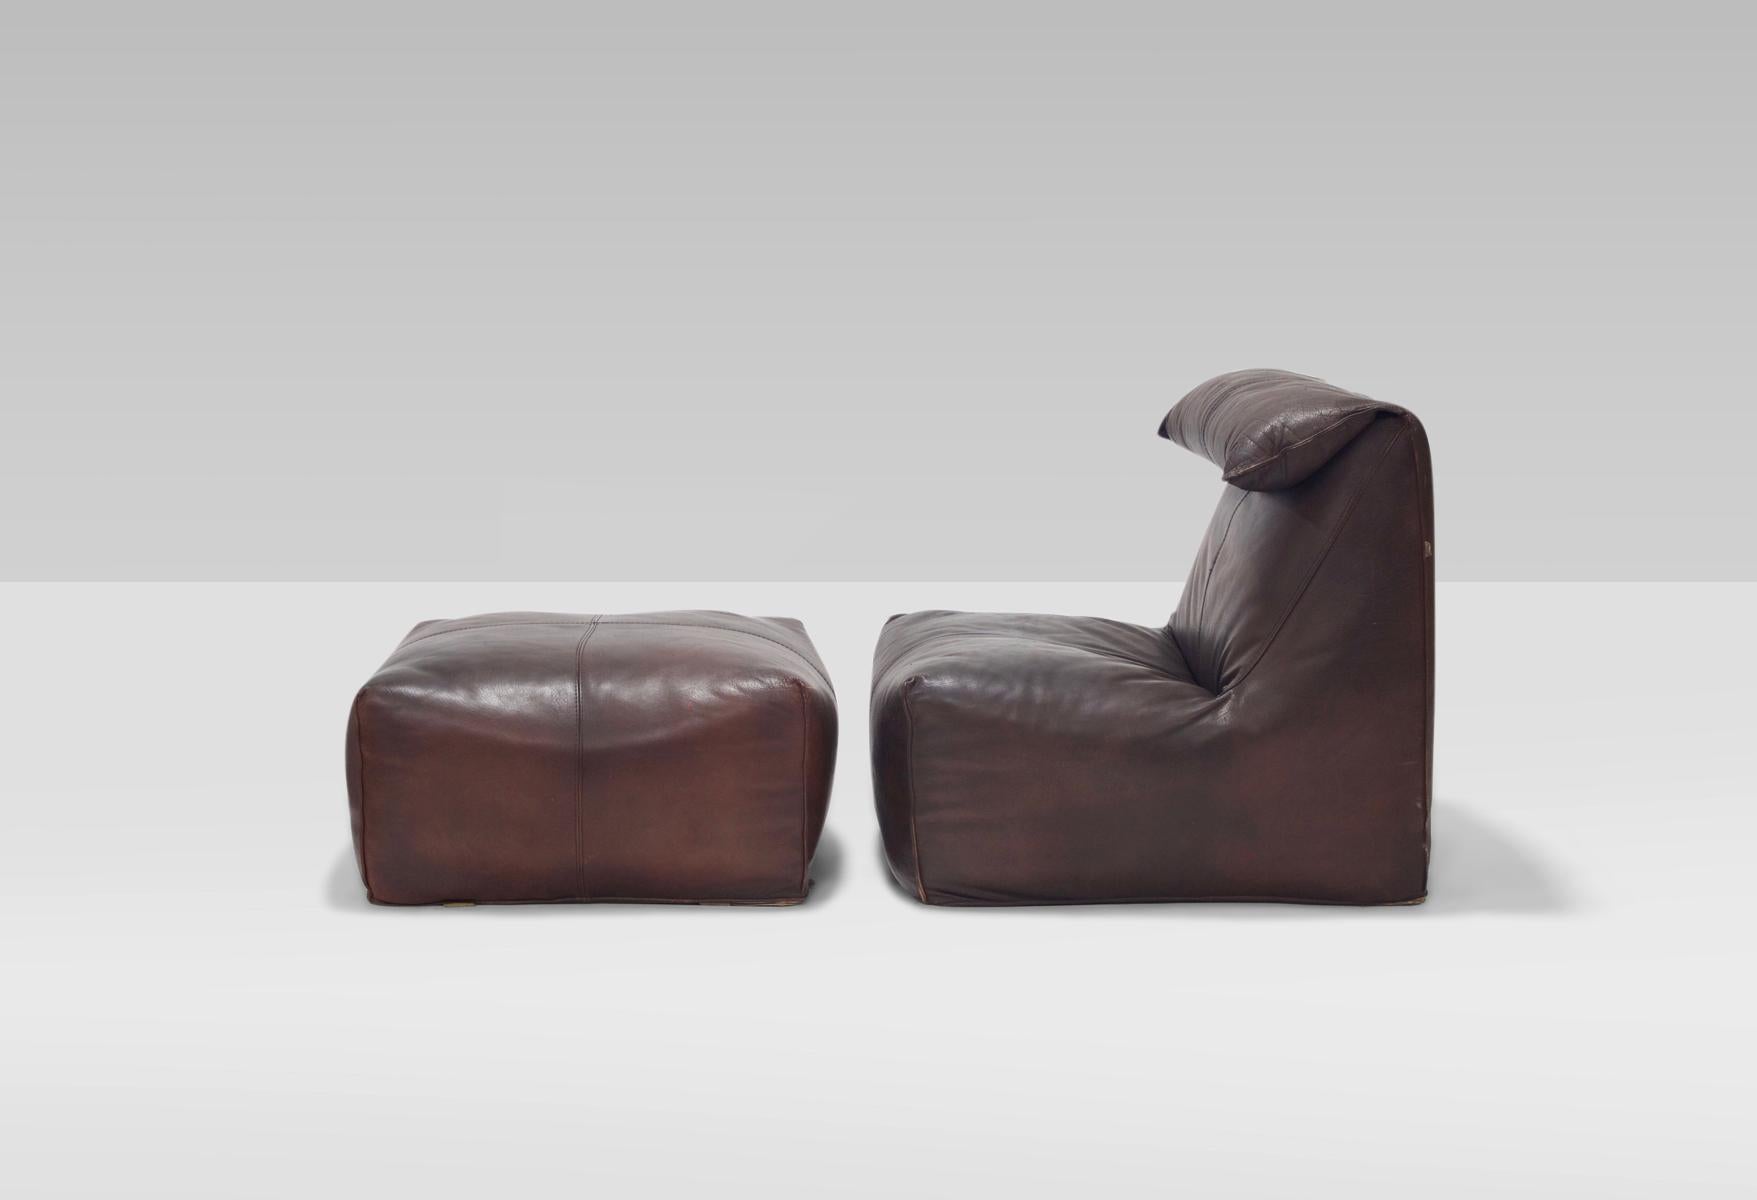 Rarely seen Bellini lounge and ottoman with original thick leather with a nice patina. In very good original condition.

The Bambole series was awarded the Compasso d'Oro in 1979. Le Bambole is included in MoMA's permanent collection.